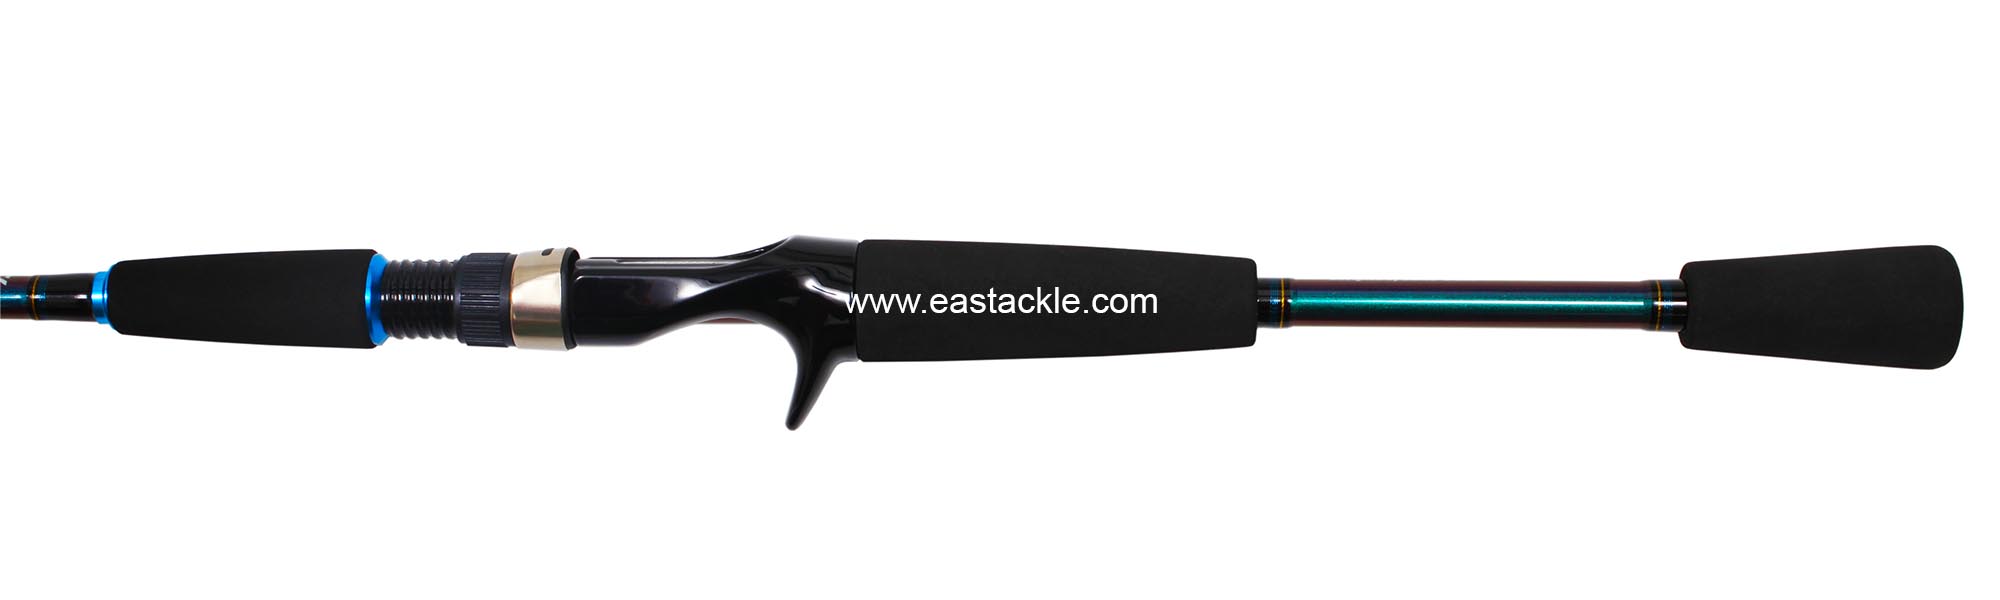 Daiwa - Harrier  - 602MB-SD - Bait Casting Rod - Handle Section (Side View) | Eastackle